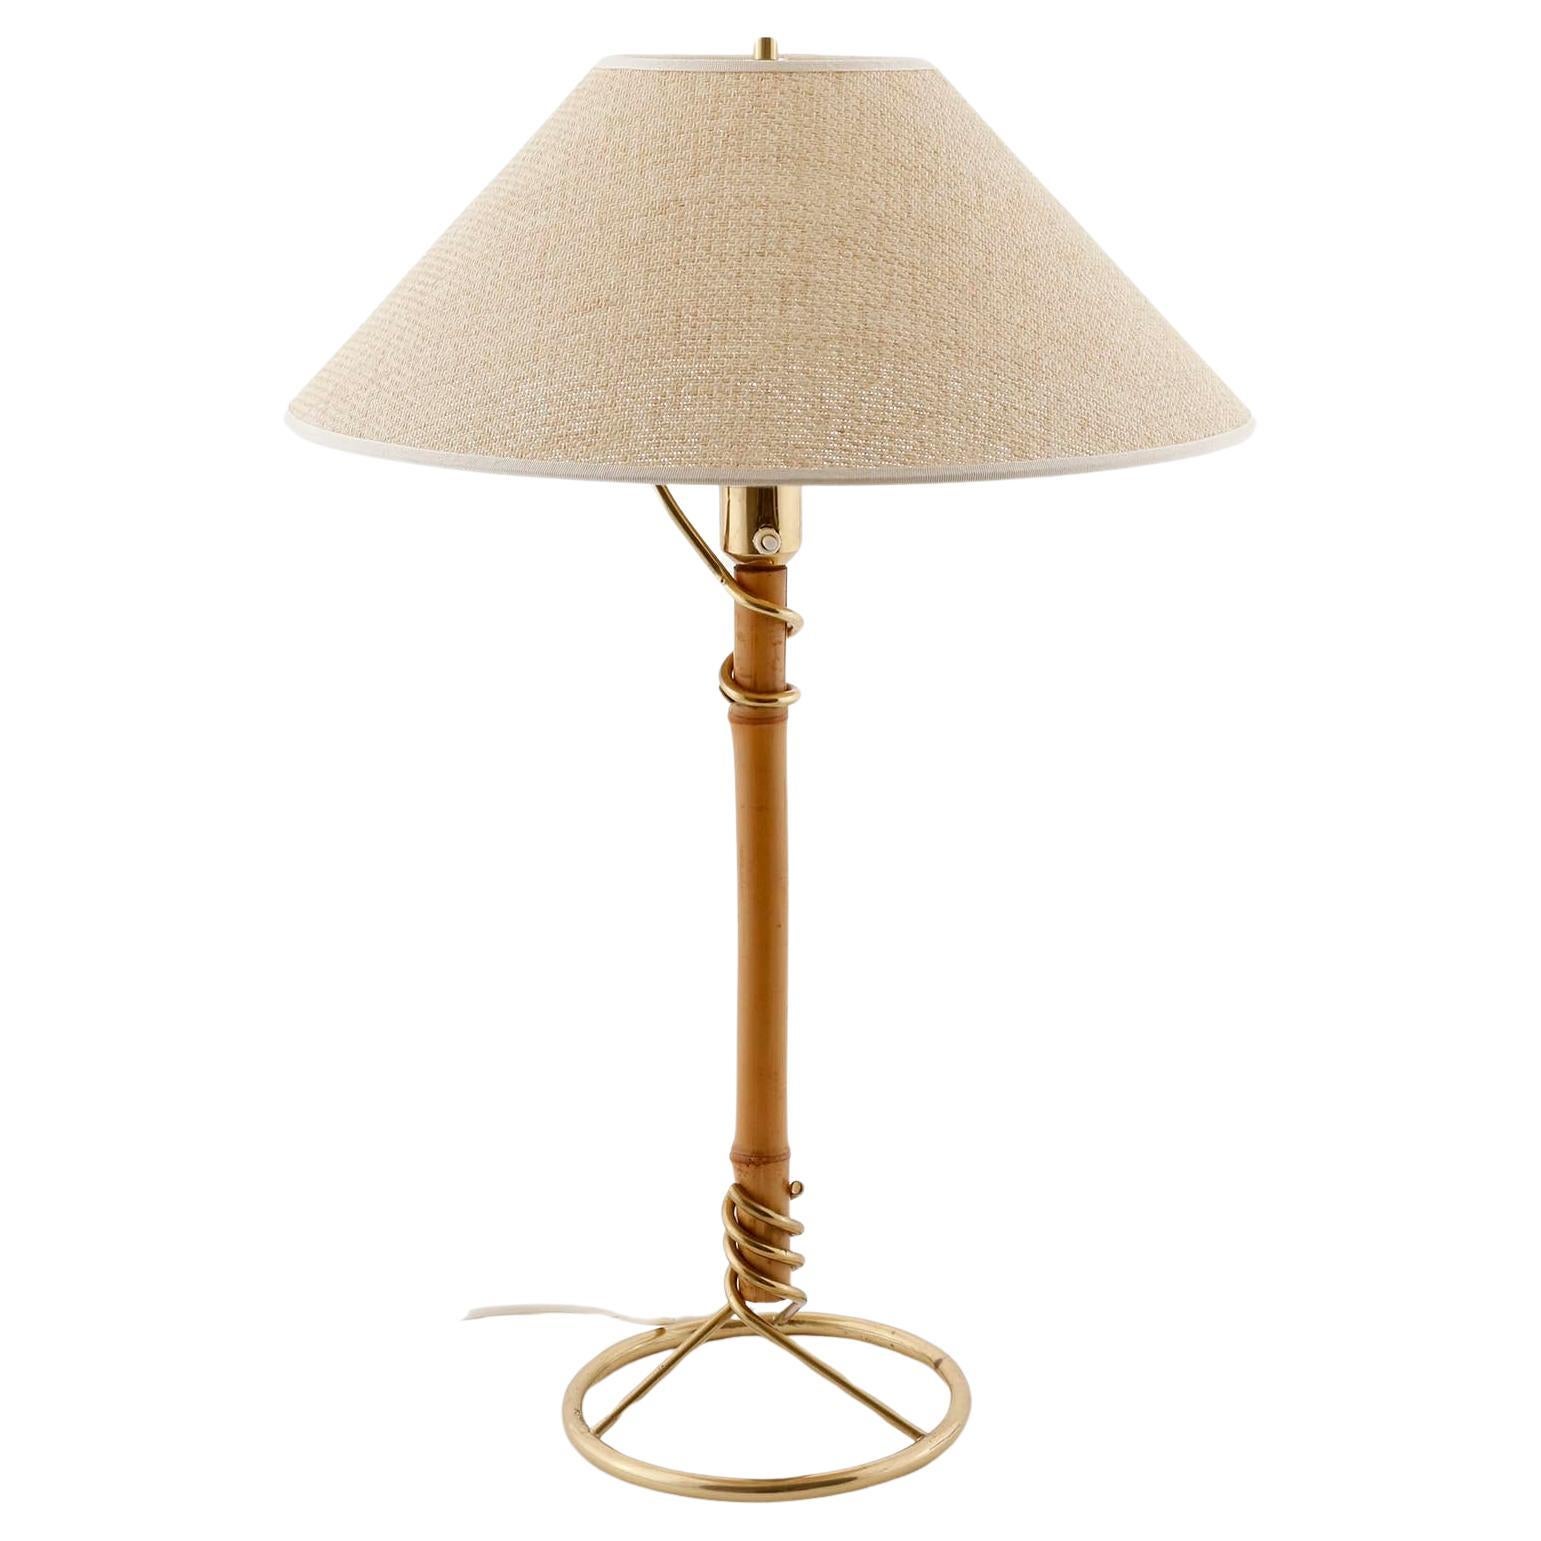 A gorgeous table or desk lamp made of polished brass and bamboo manufactured in Austria, Vienna, in 1950s or early 1960s. The piece is attributed to Austrian lighting maker J.T. Kalmar.
Kalmar collaborated with several renowned Austrian architects,